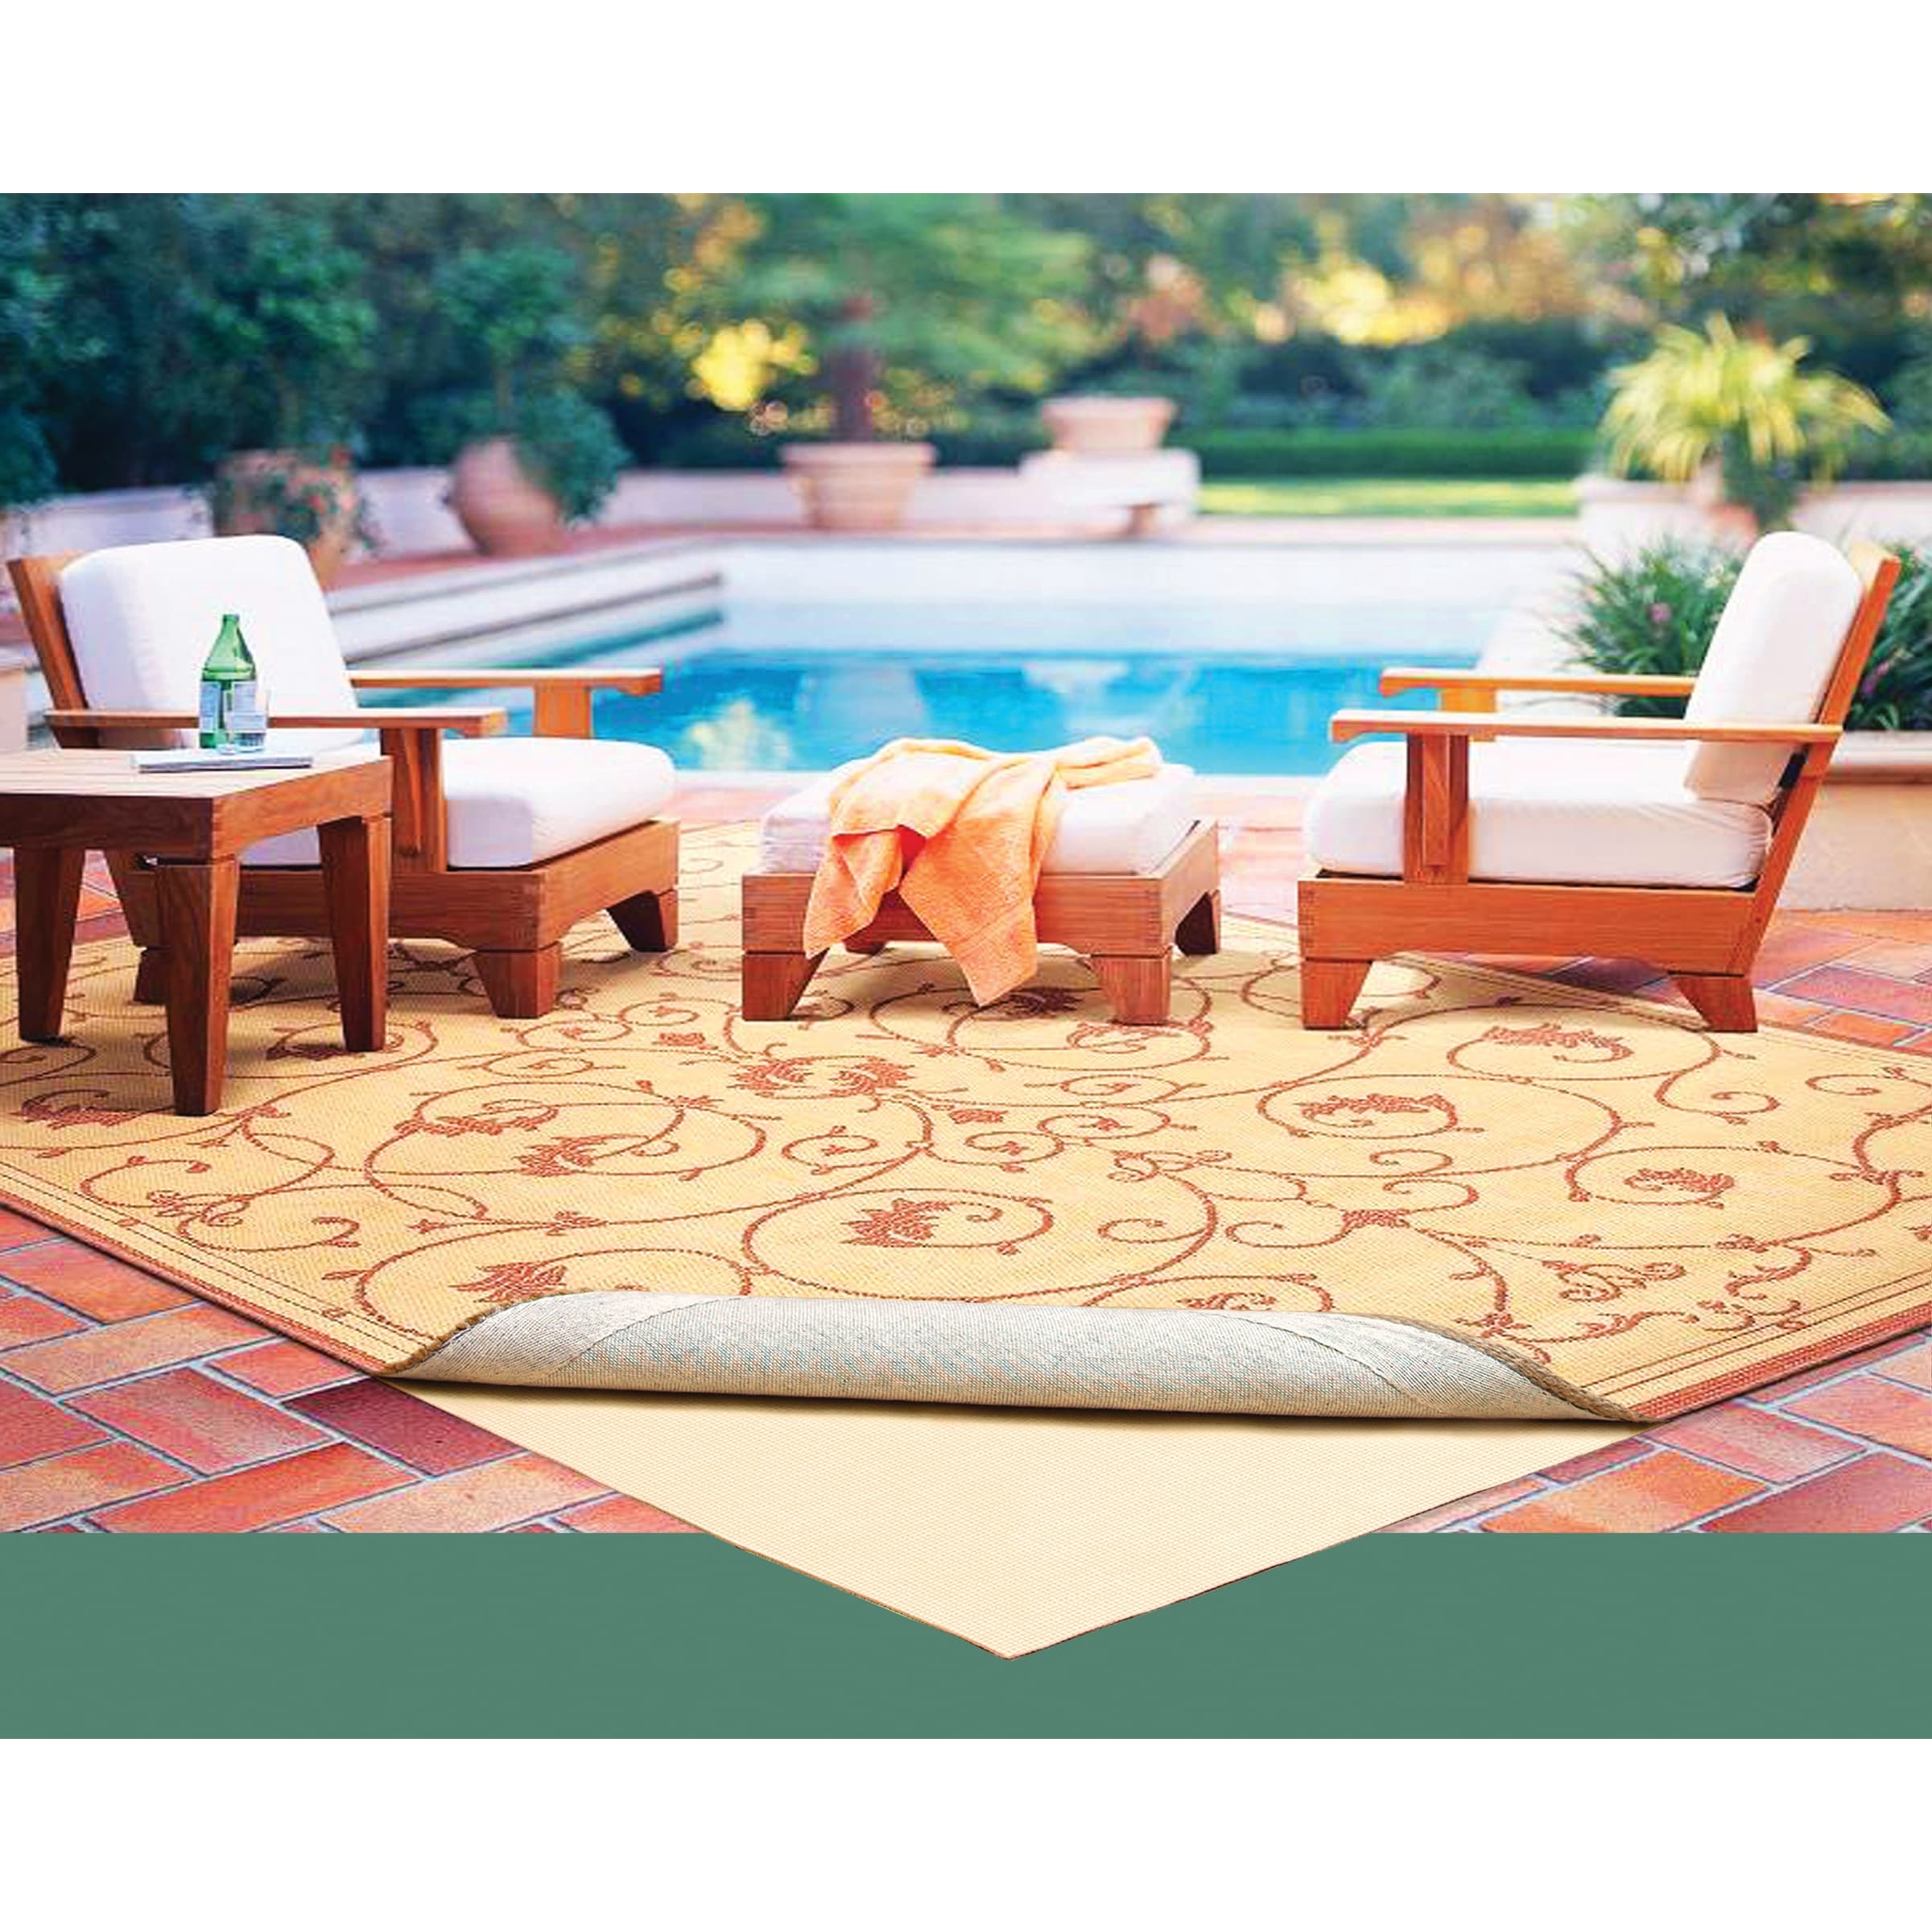 https://ak1.ostkcdn.com/images/products/is/images/direct/79ae6ee2e8c6a00e206e98315d763ef6102e920b/Con-Tact-Brand-Round-Outdoor-Patio-Rug-Pad-102-Inches.jpg